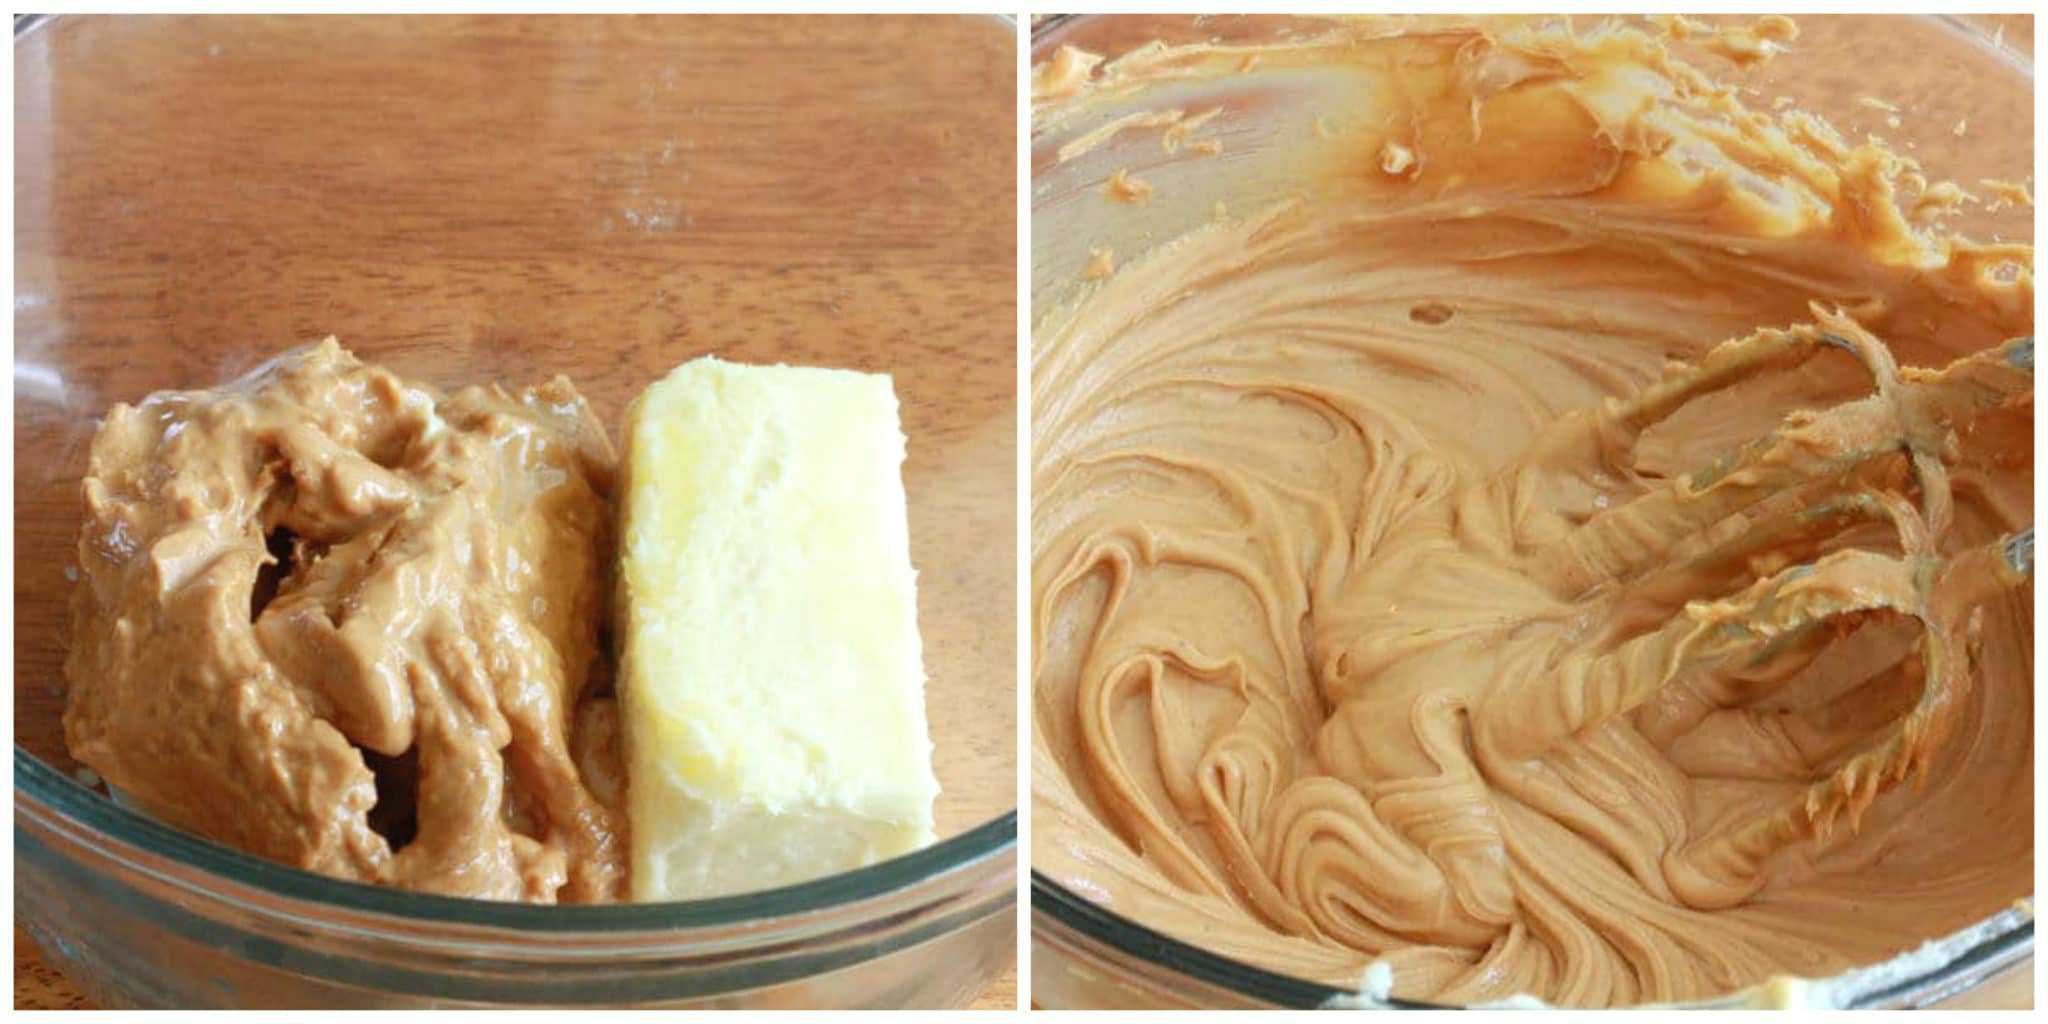 How to make peanut butter cake